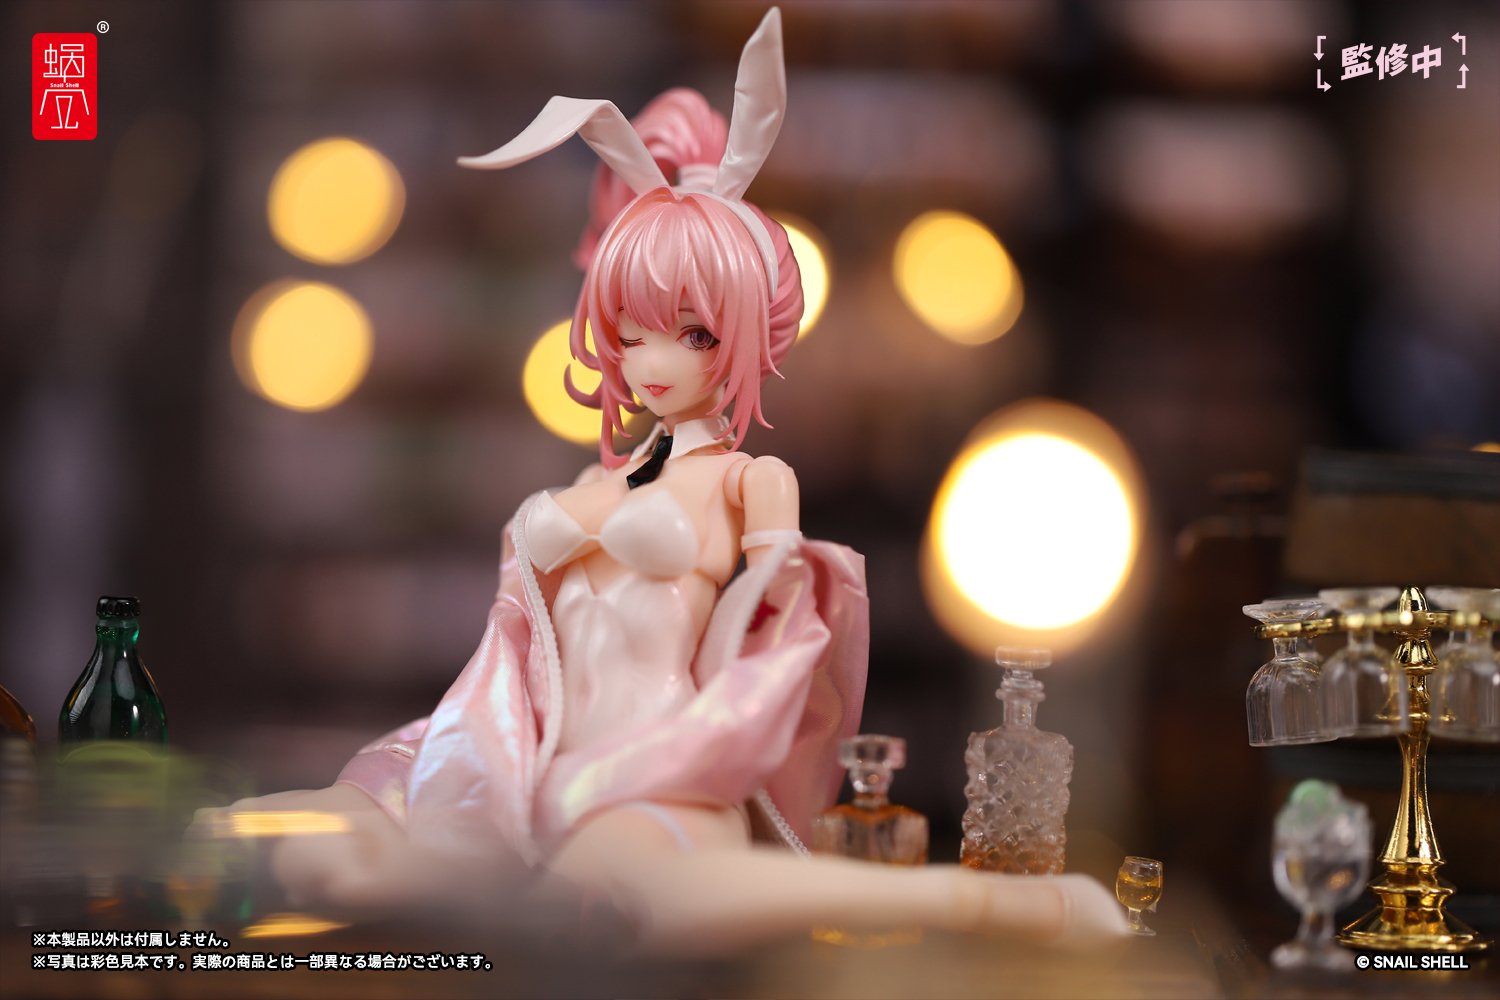 From Snail Shell, Action Figures of Bunny Ladies &quot;Aileen&quot; and &quot;Cyclone Bunny&quot; Announced!